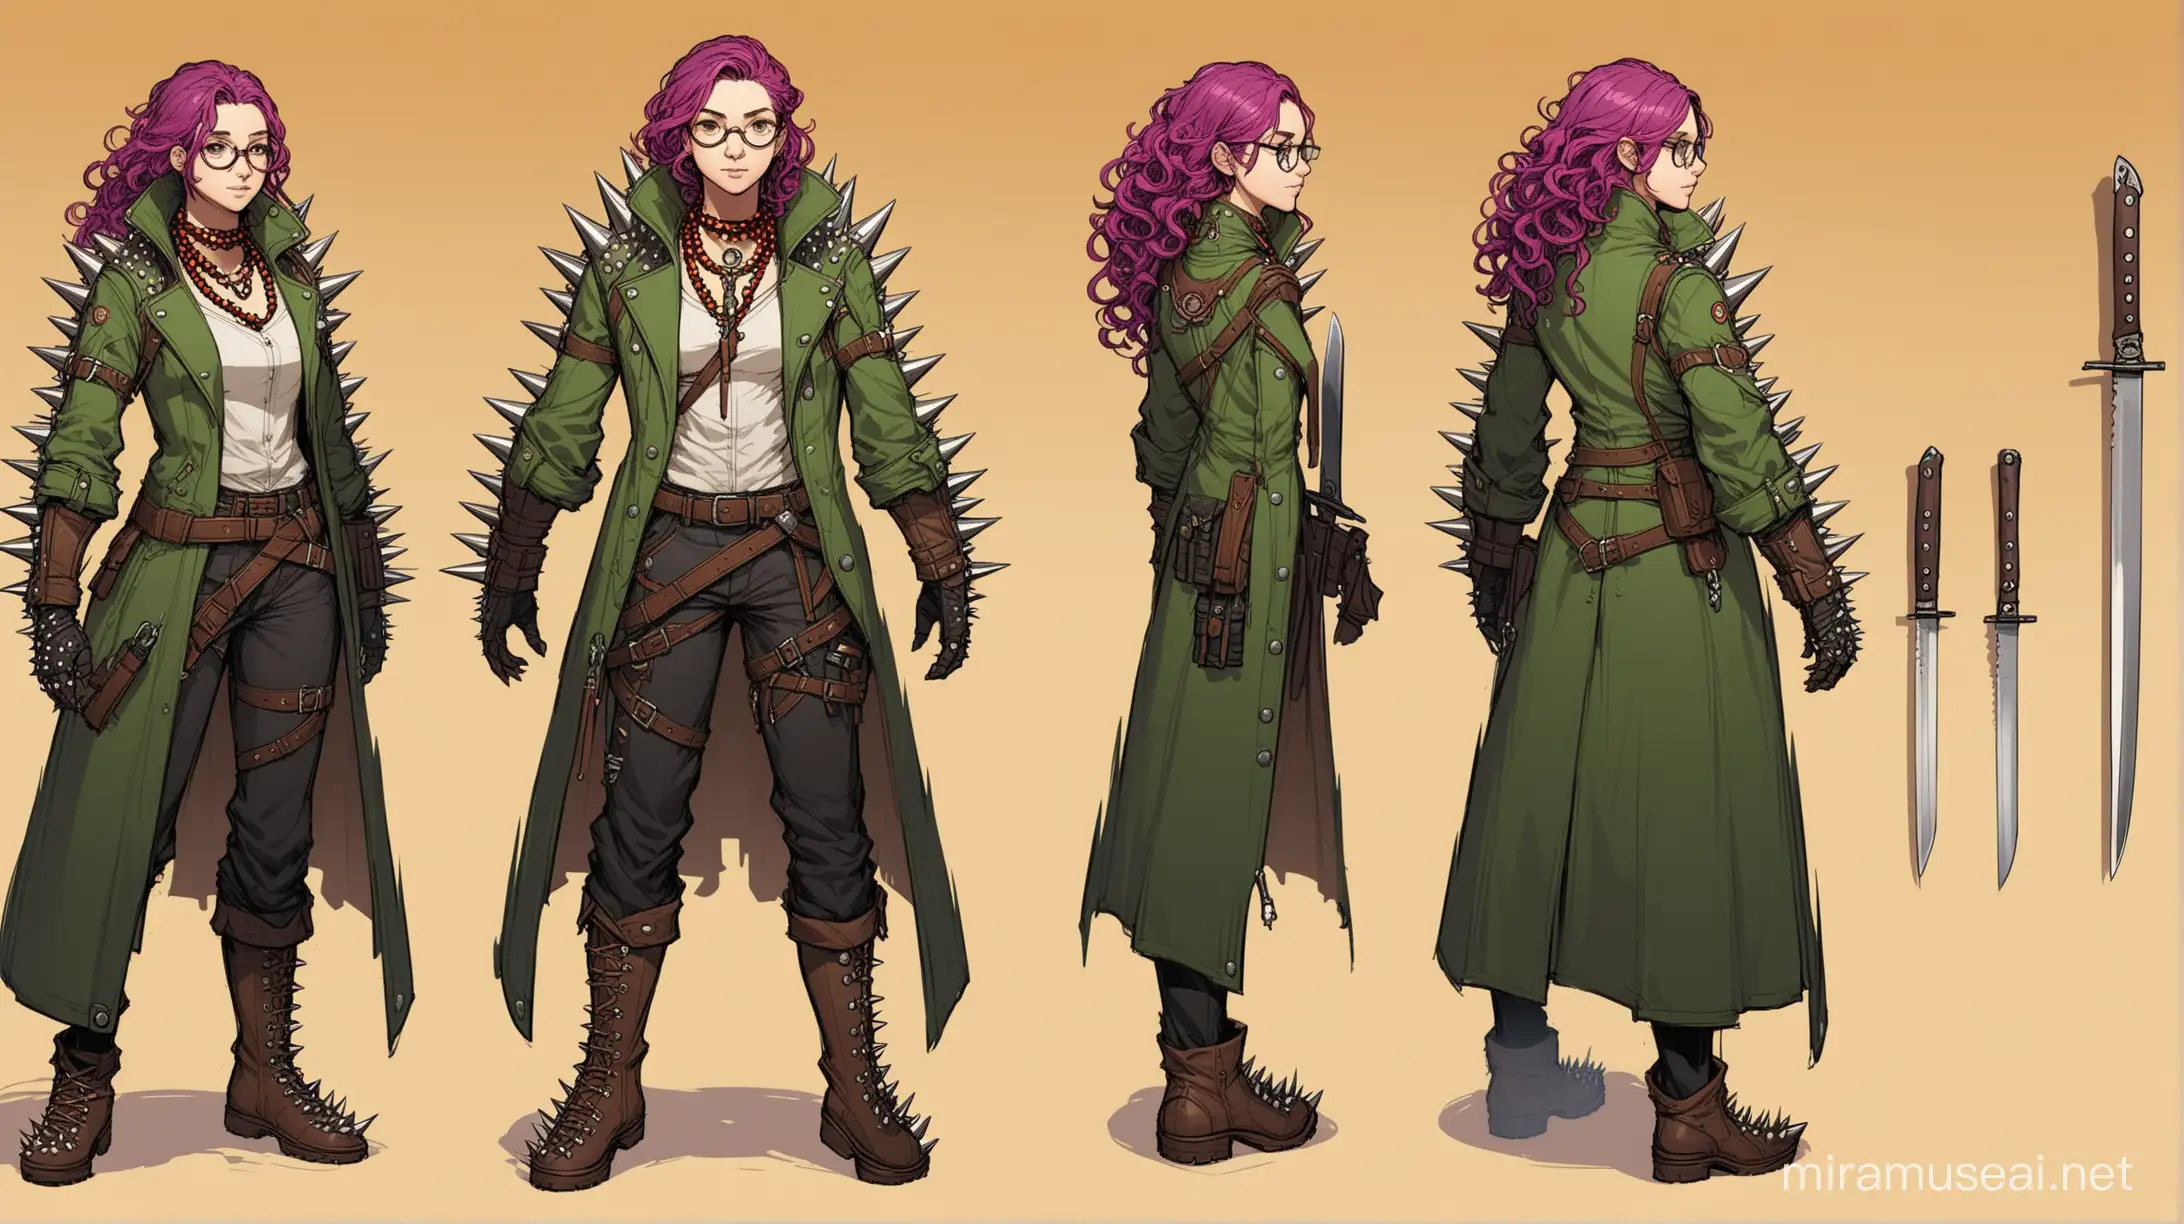 concept art of the character, jacket with spikes, jacket with straps on the arms, concept art, lots of detail, full-length character, amber background, wooden beads on the neck, red steam around the body, lilac curly hair, intricate details, boots with green soles, thick rings on the hands, round glasses, on the leg, sheath for three knives, Concept art.